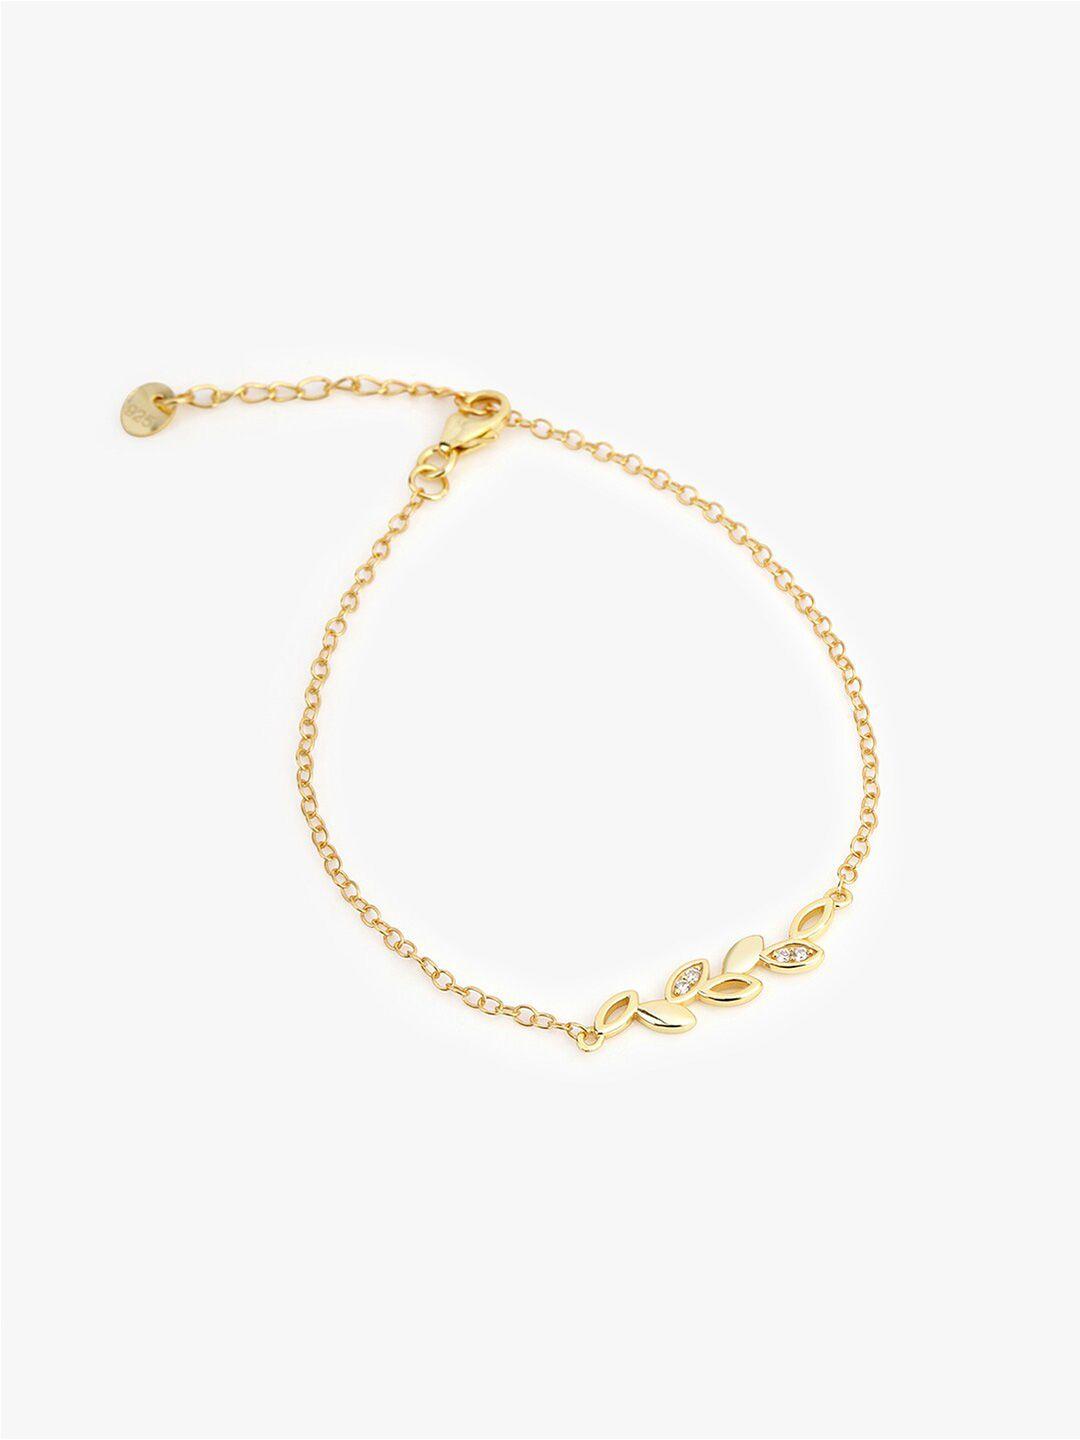 mikoto by fablestreet women 18 k gold-plated sterling silver cubic zirconia charm bracelet